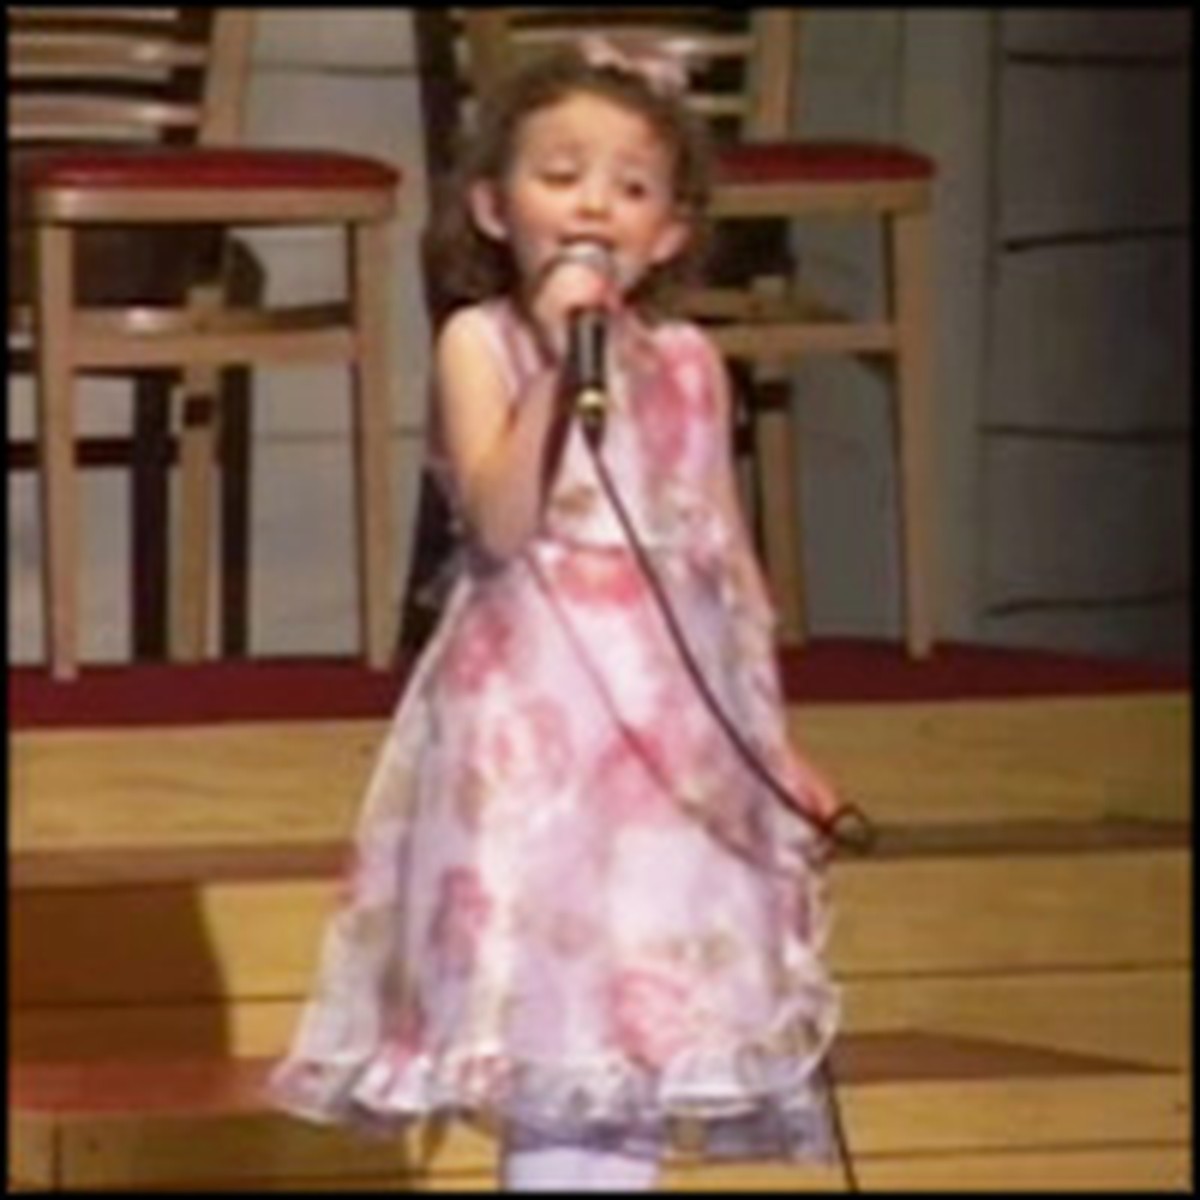 Cute 5 Year-Old Sings Come to Jesus in the SWEETEST Way - Click to Listen!